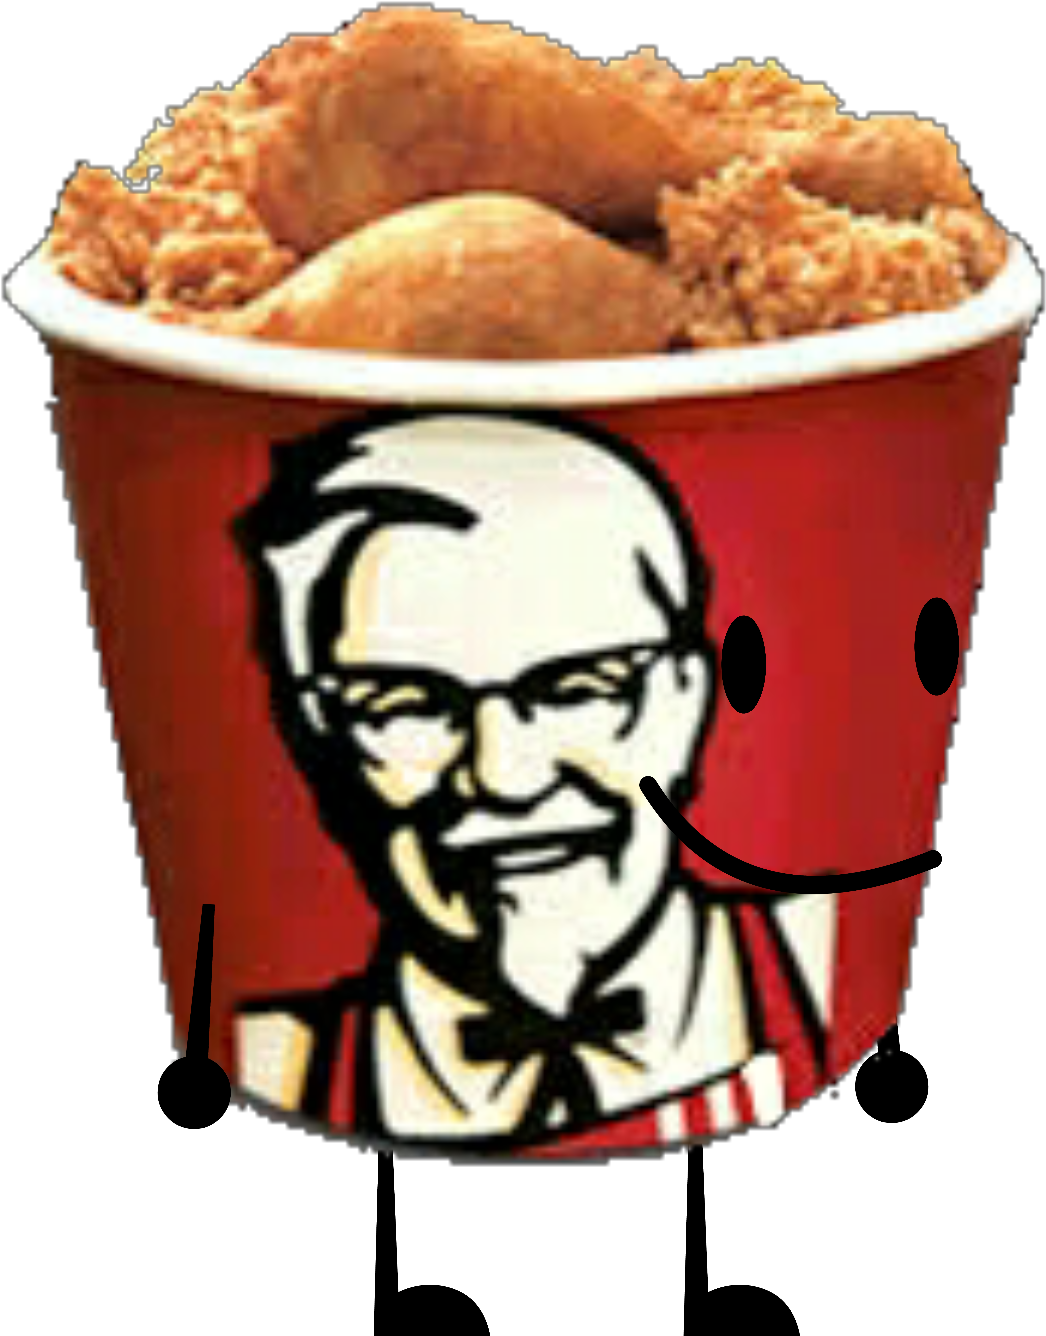 Chicken Bucket Kfc PNG Image High Quality PNG Image